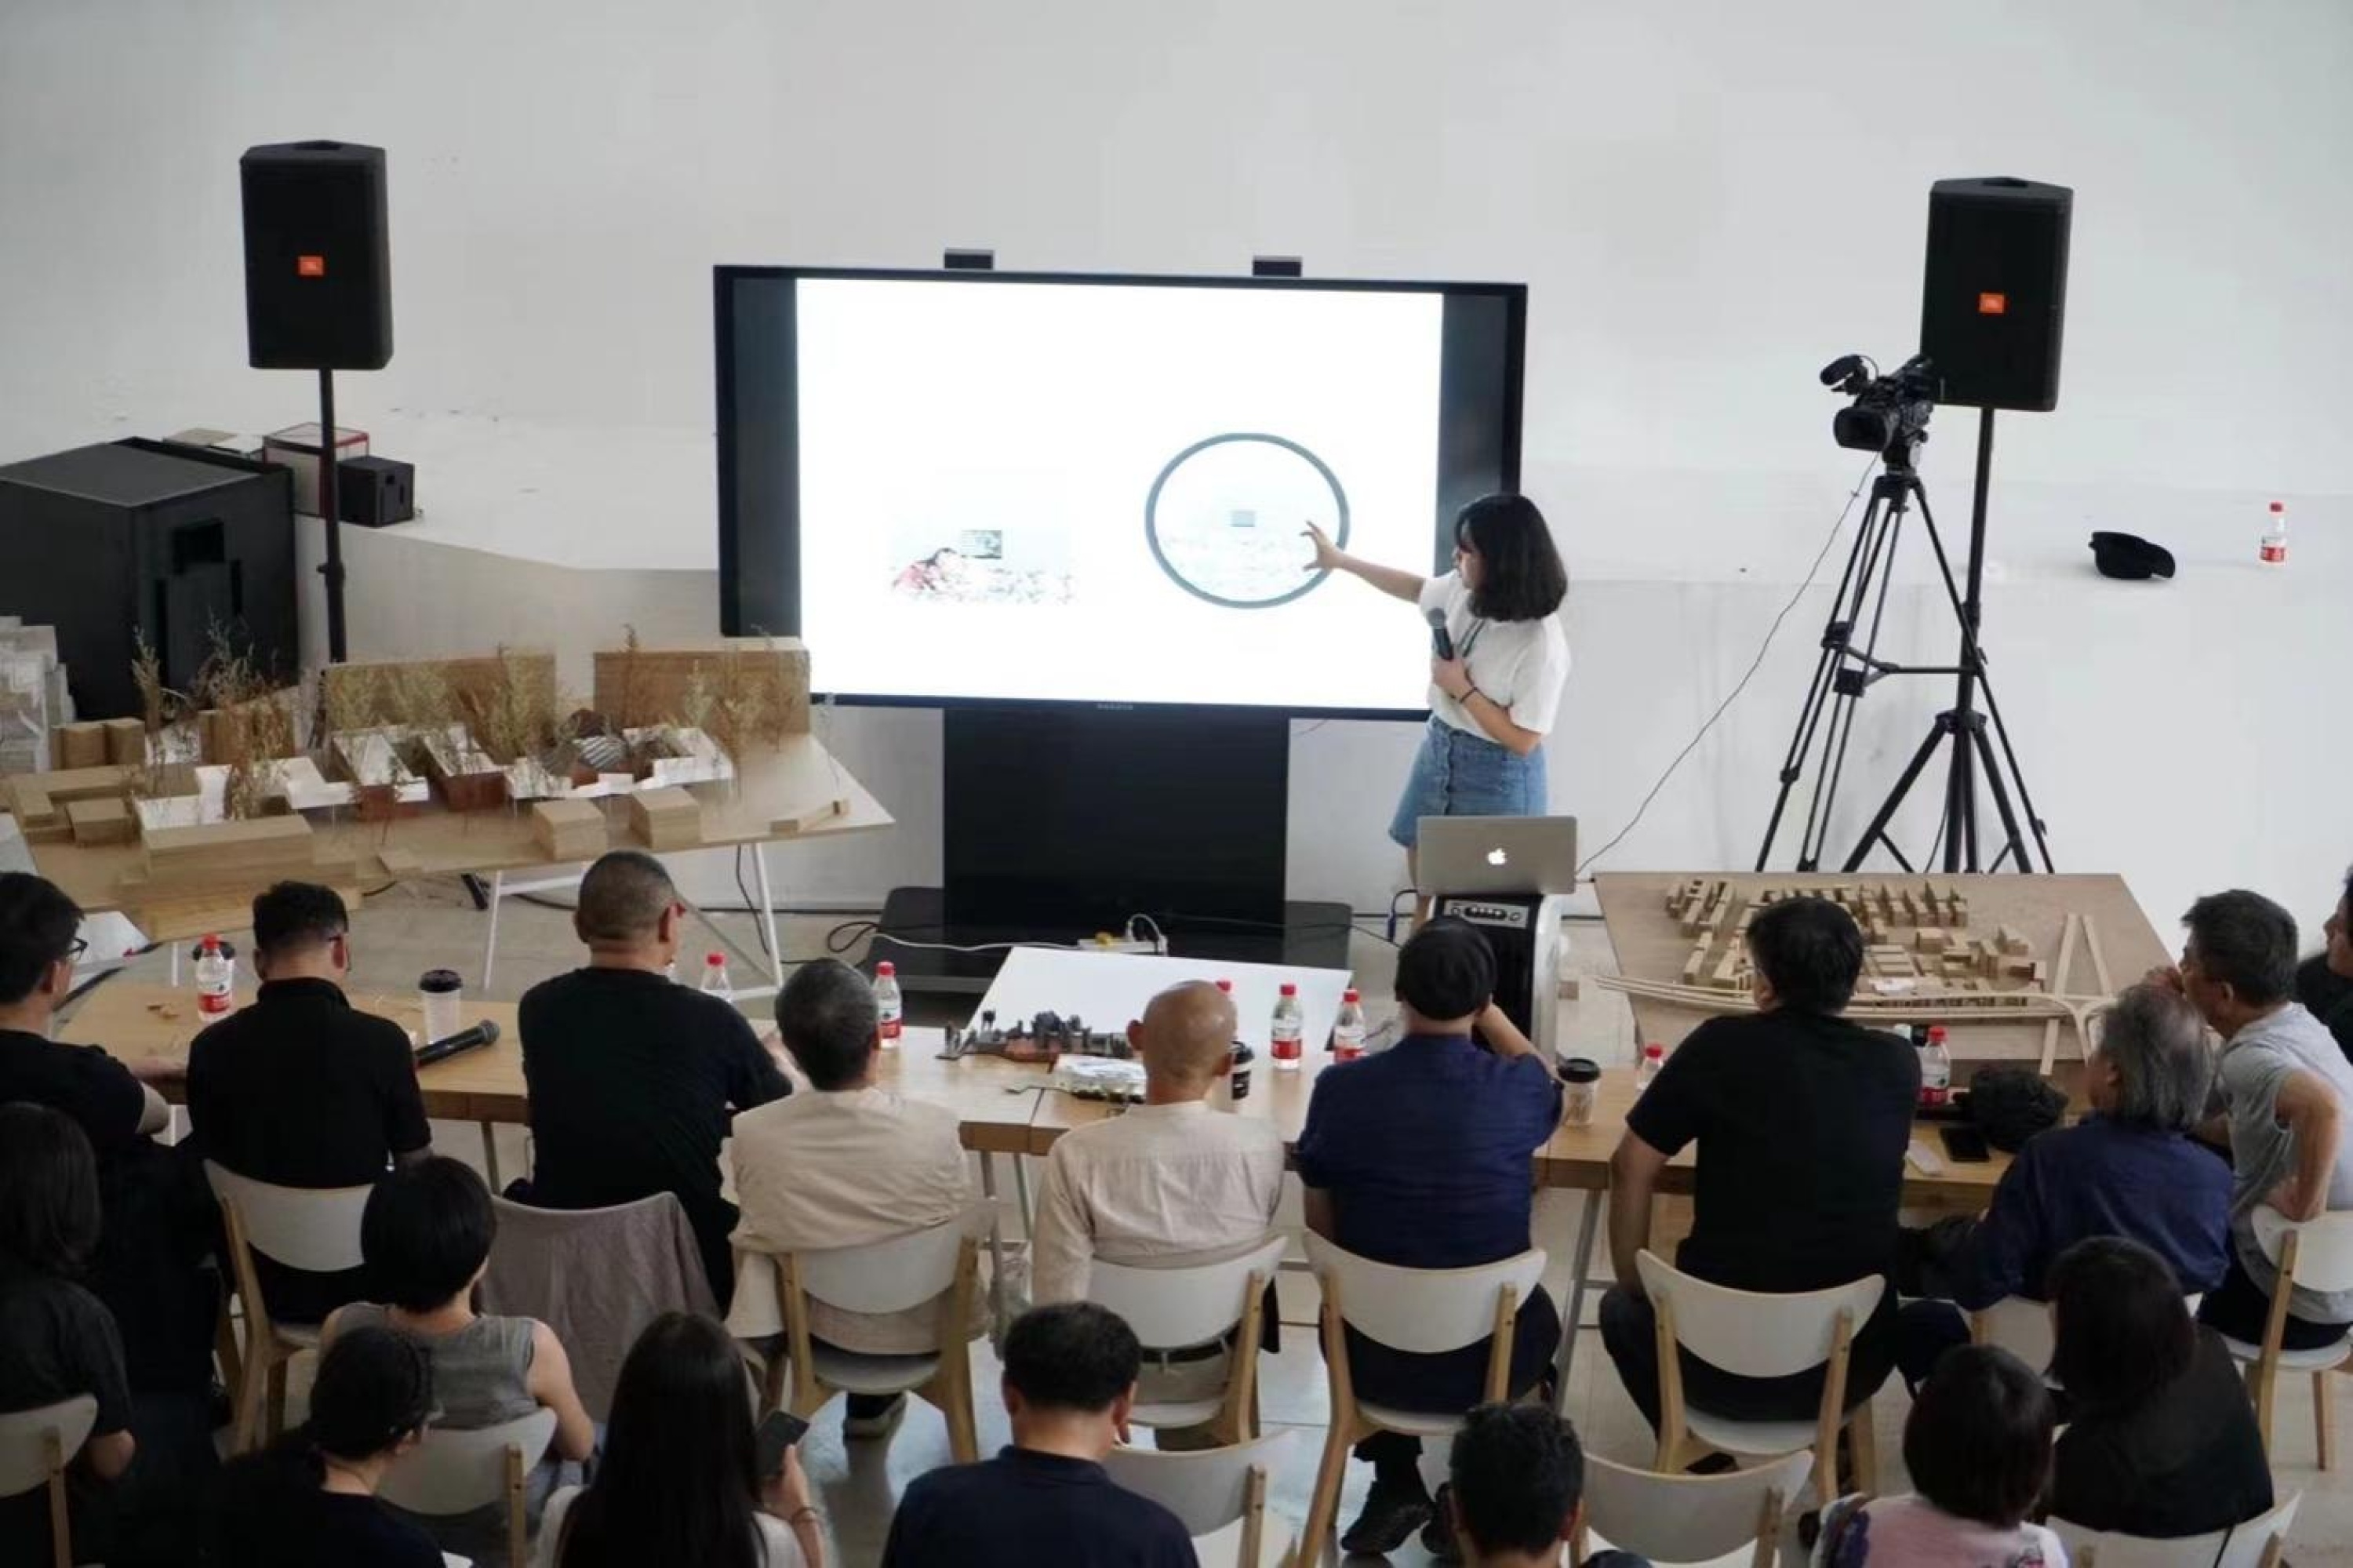 Jiakun Liu and Zigeng Wang Jointly Guided the Design Course “Film Museum” for the Third Year Experimental Class of the Central Academy of Fine Arts